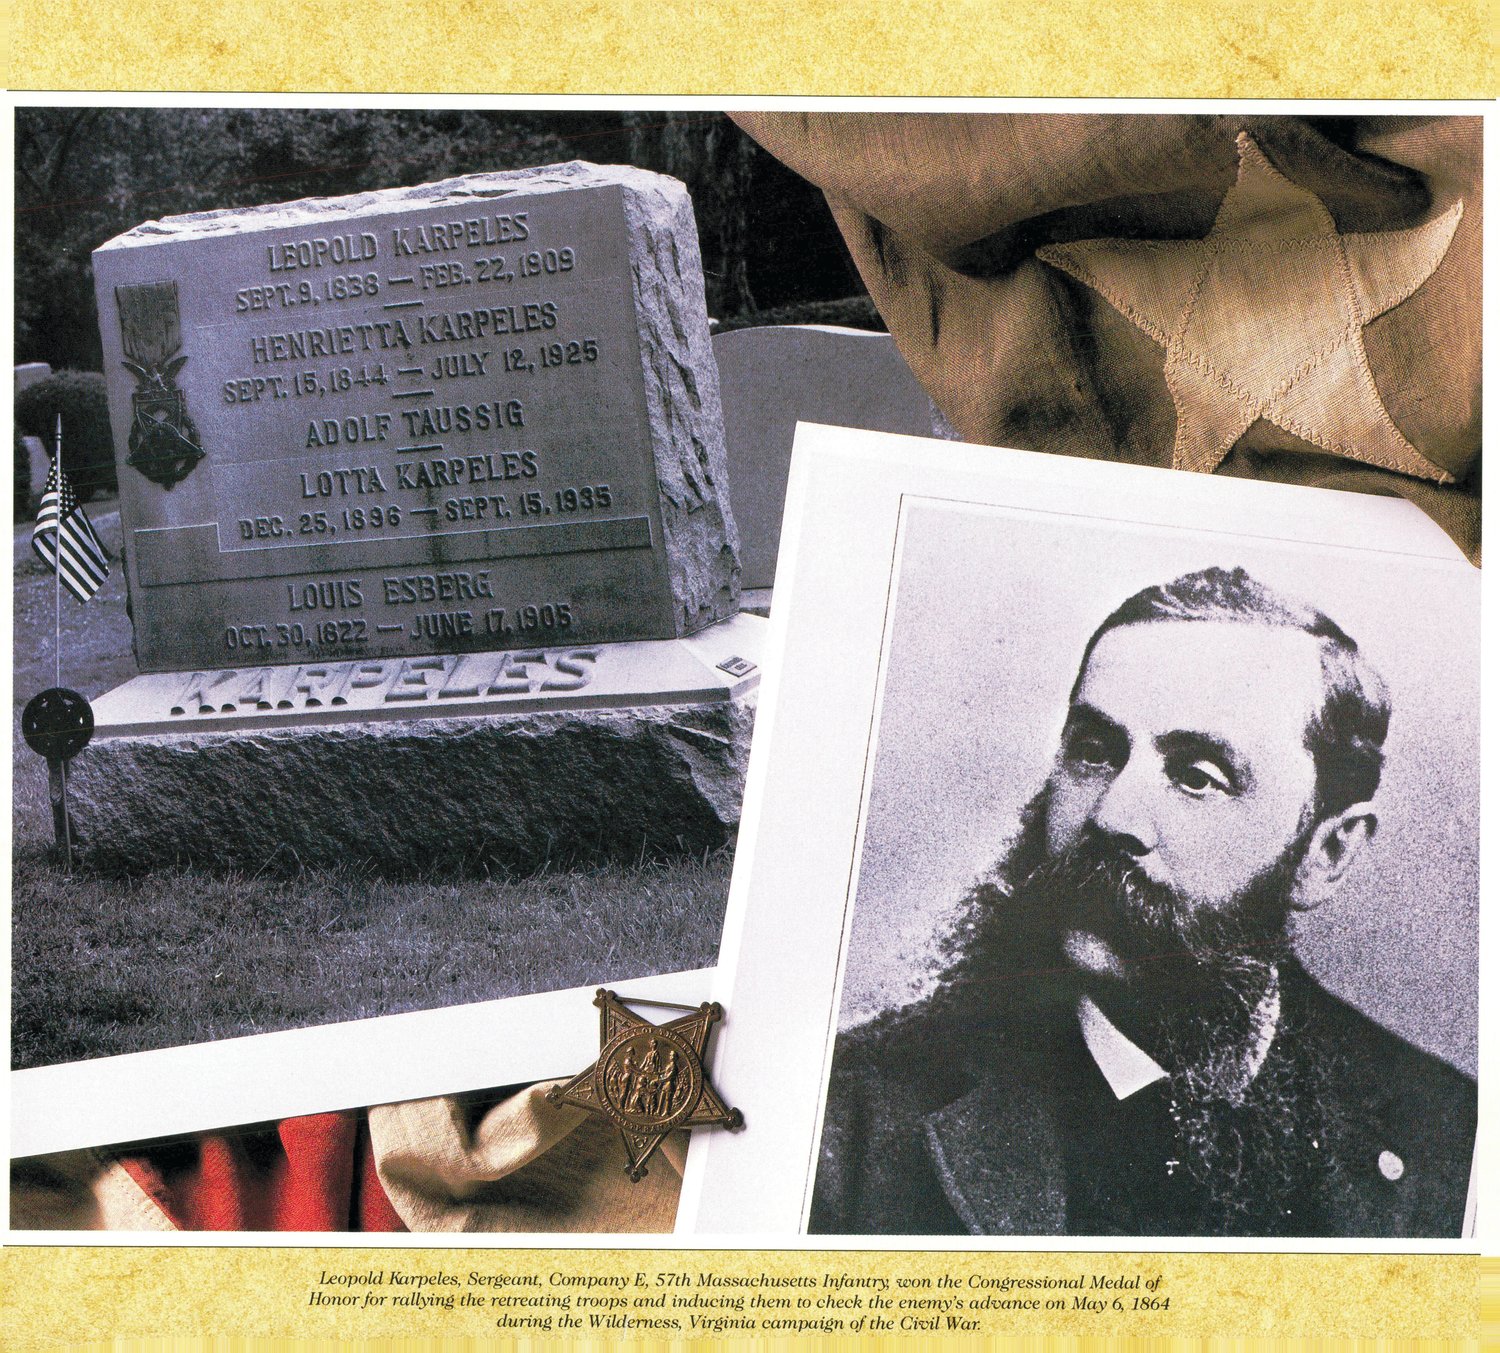 Leopold Karpeles won the Congressional Medal of honor for rallying retreating troups and inducing them to check the enemy’s advance on May 6, 1864 during the Wilderness, Virginia campaign of the Civil War.